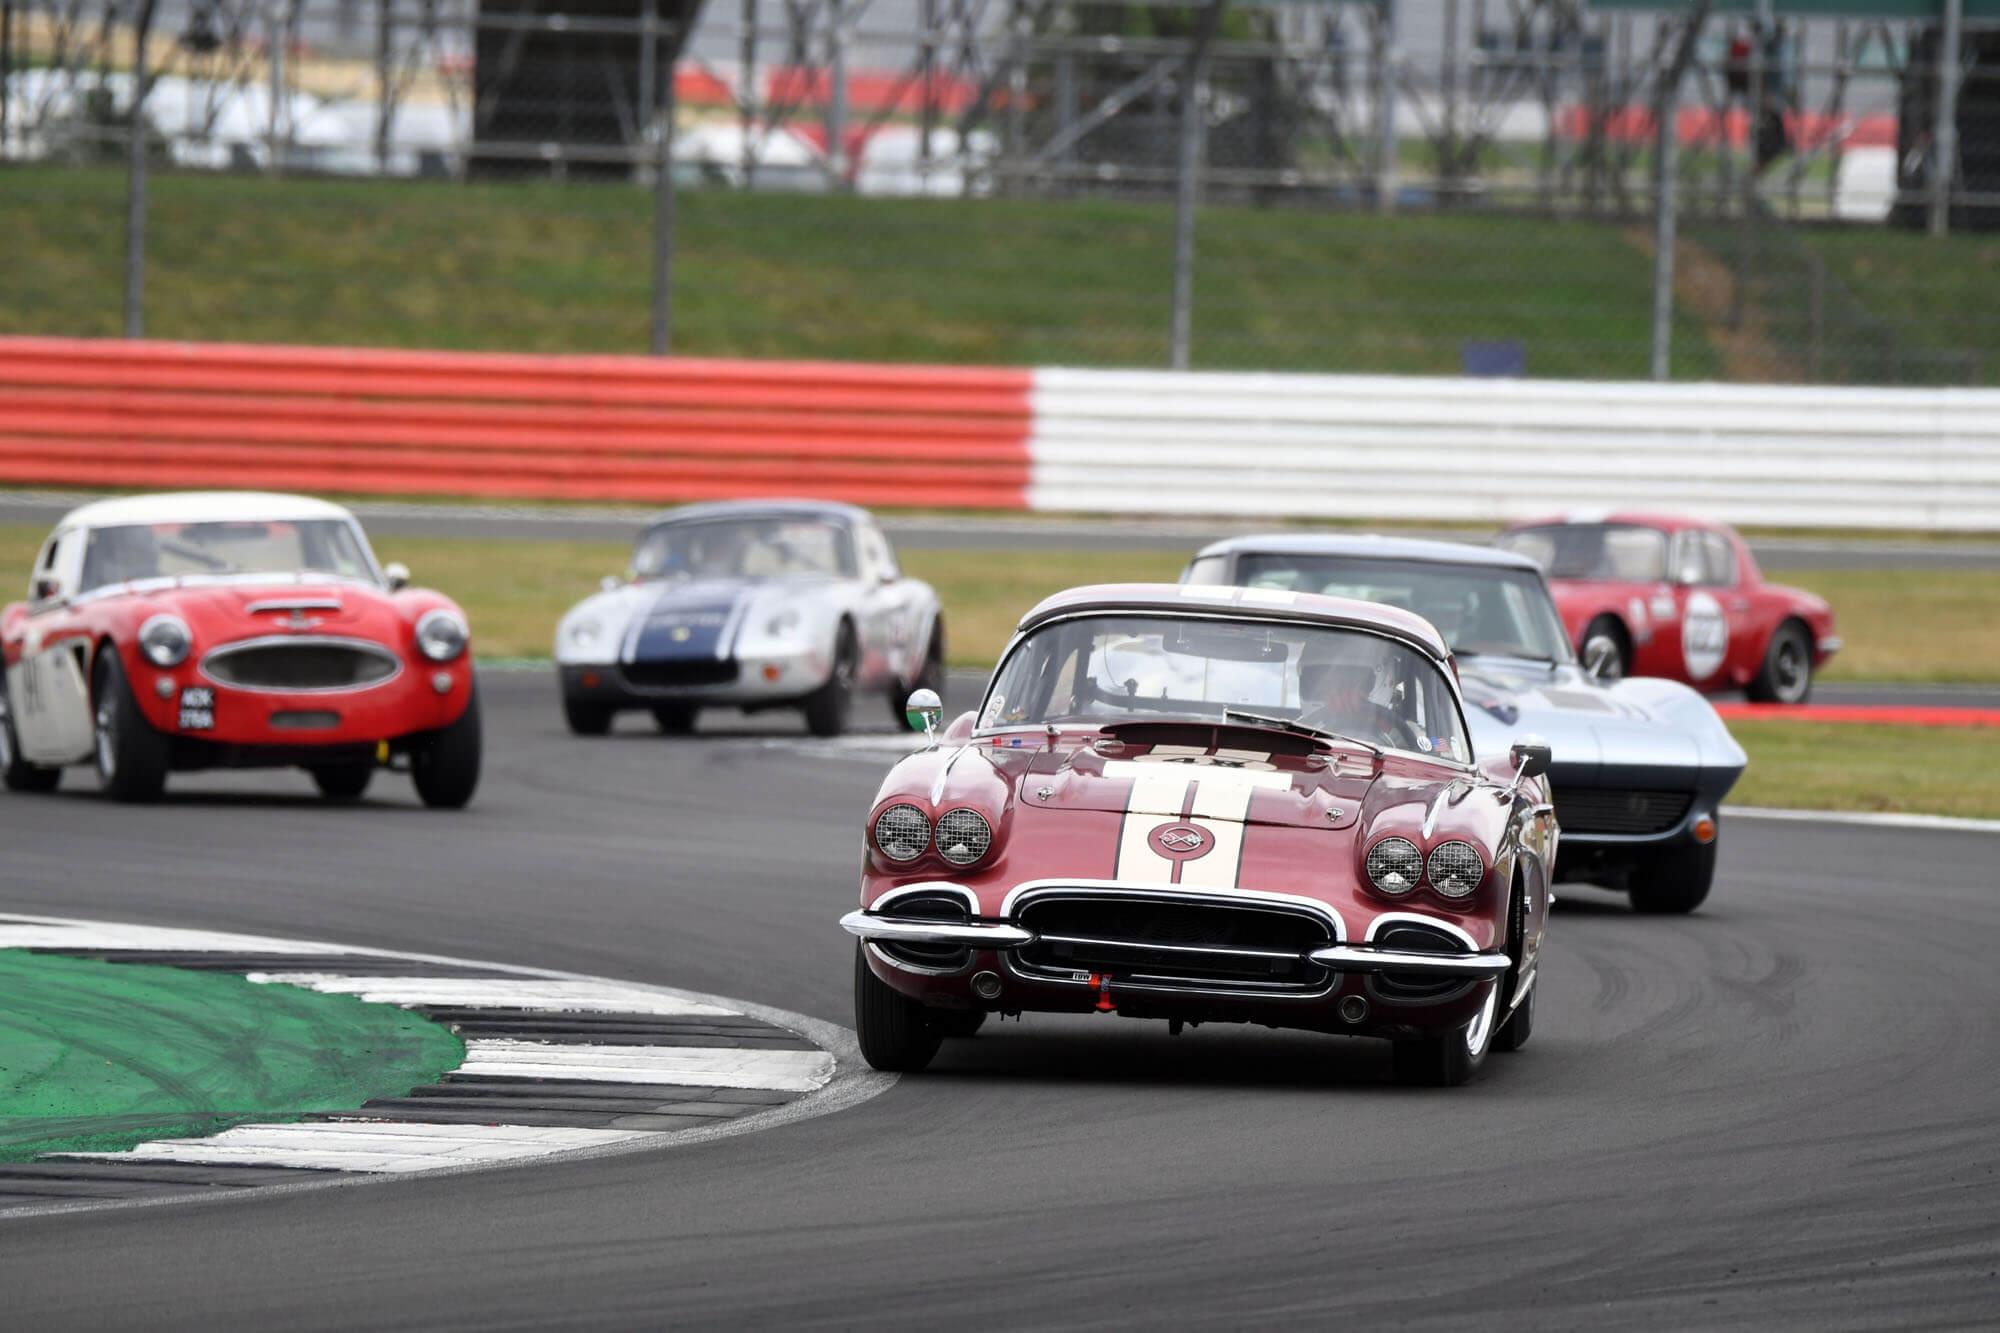 Five classic cars competing in the International Trophy at The Classic at Silverstone